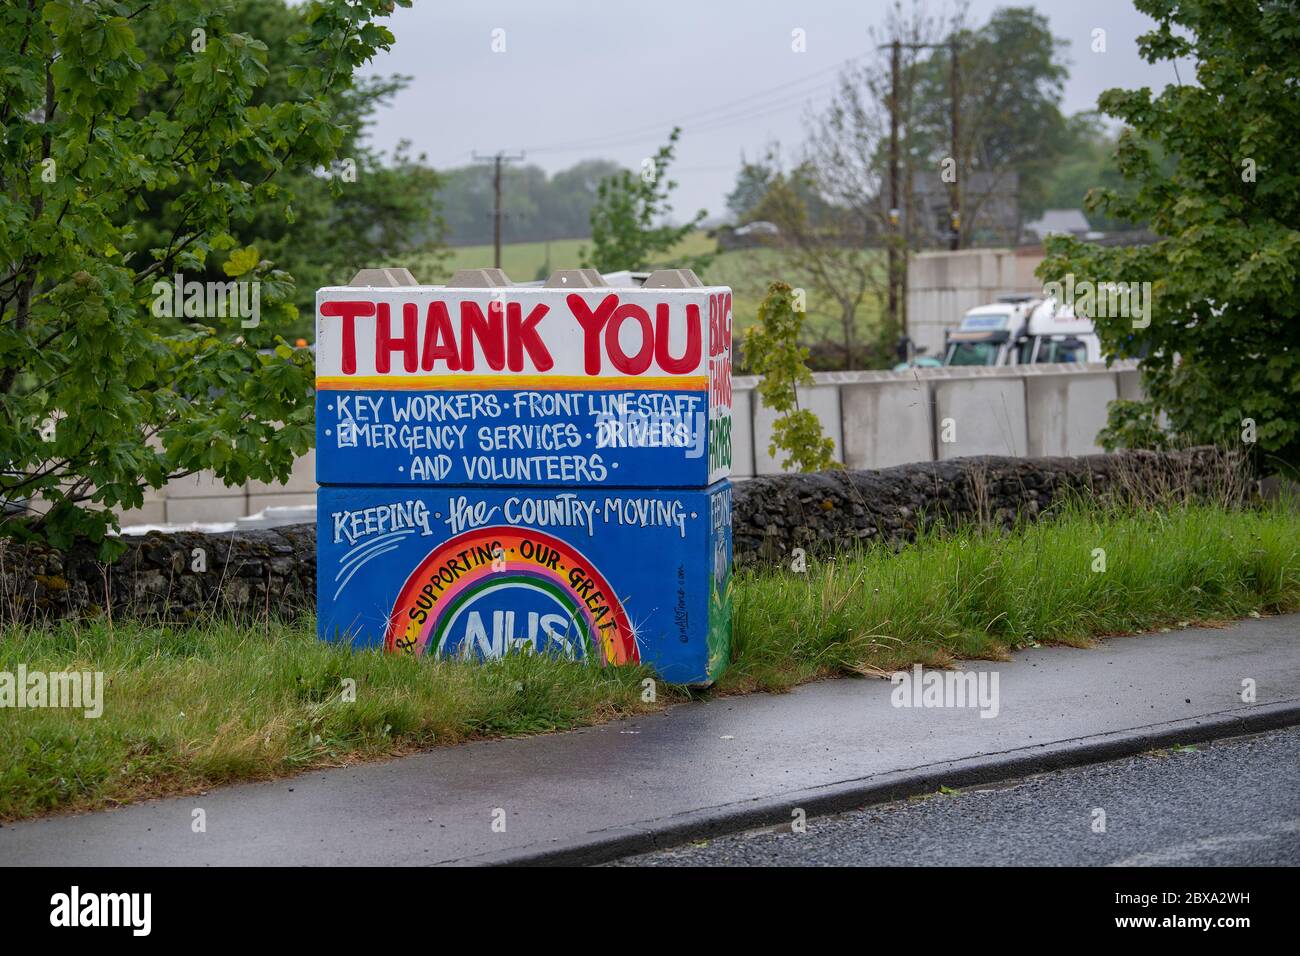 Painted message on concrete blocks thanking Key Workers during the Corona Covid-19 pandemic in the UK. North Yorkshire. Stock Photo